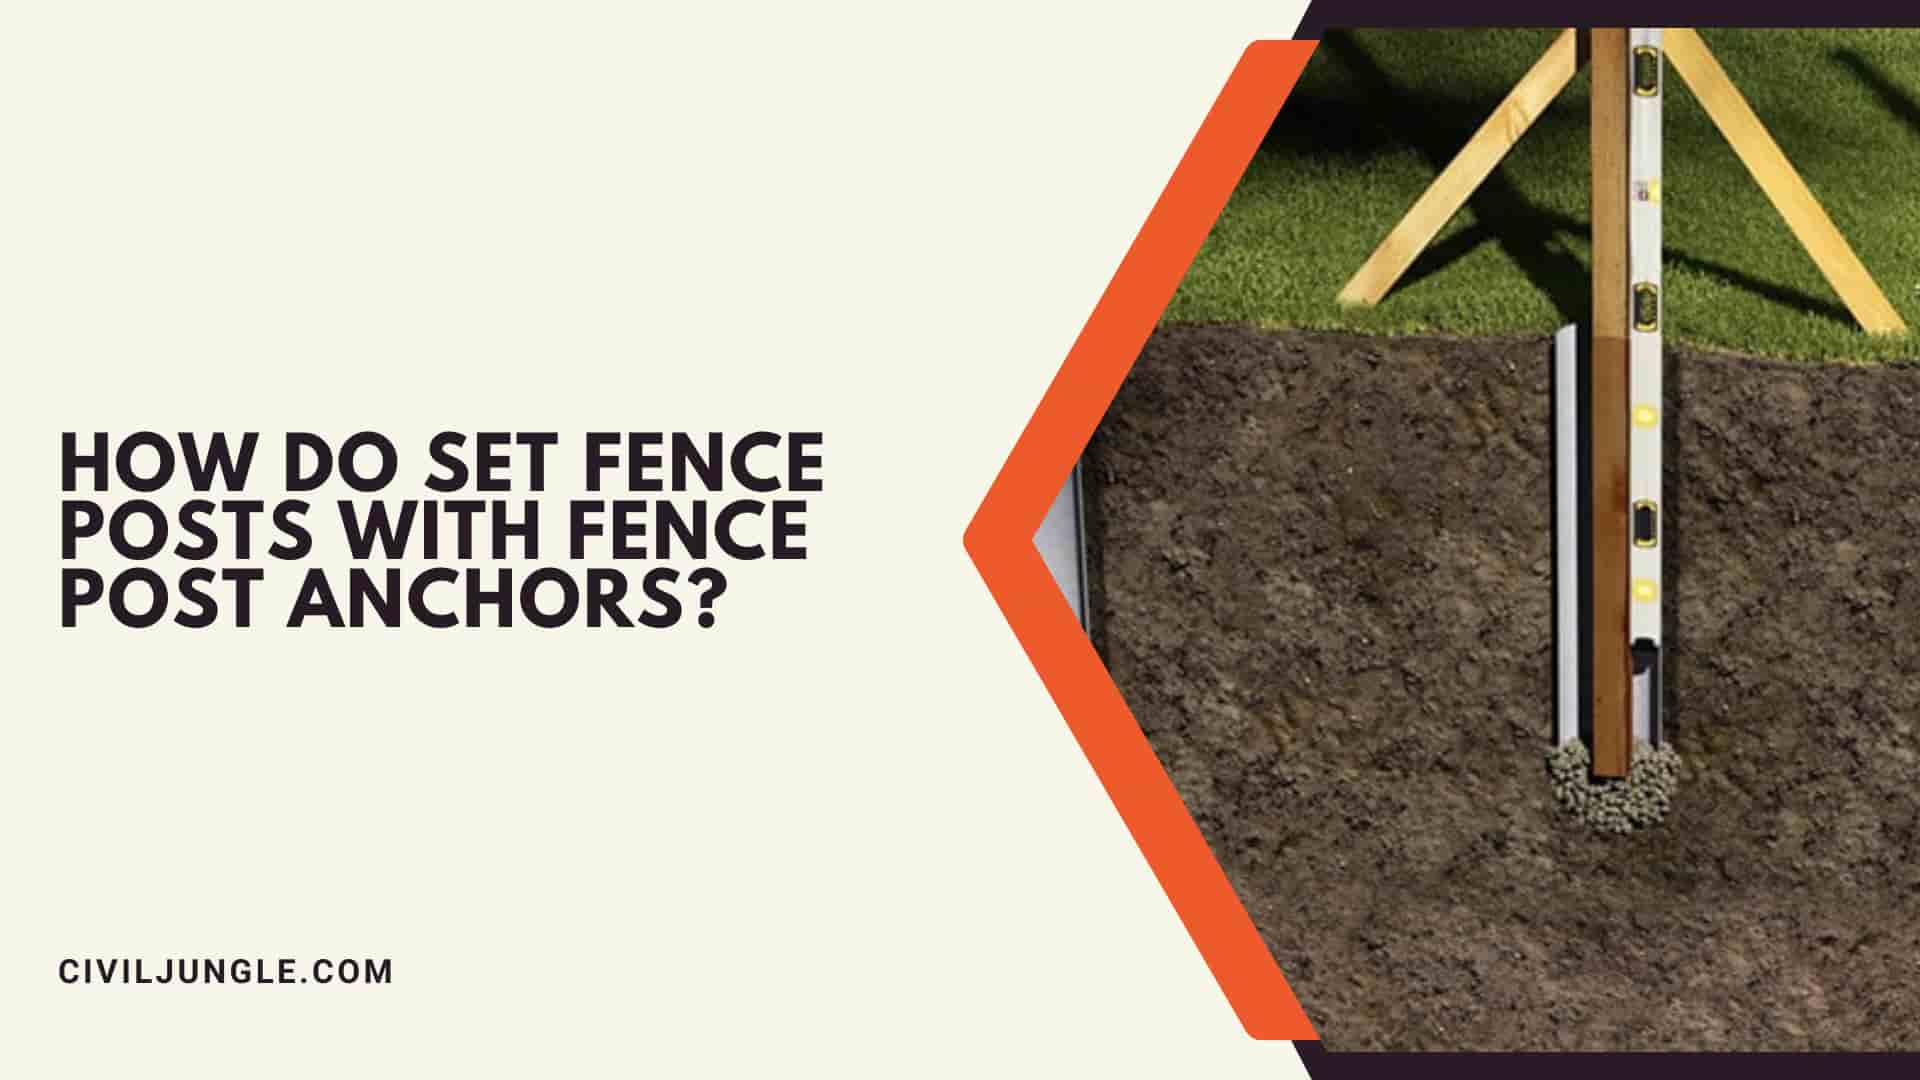 How do Set Fence Posts with Fence Post Anchors?